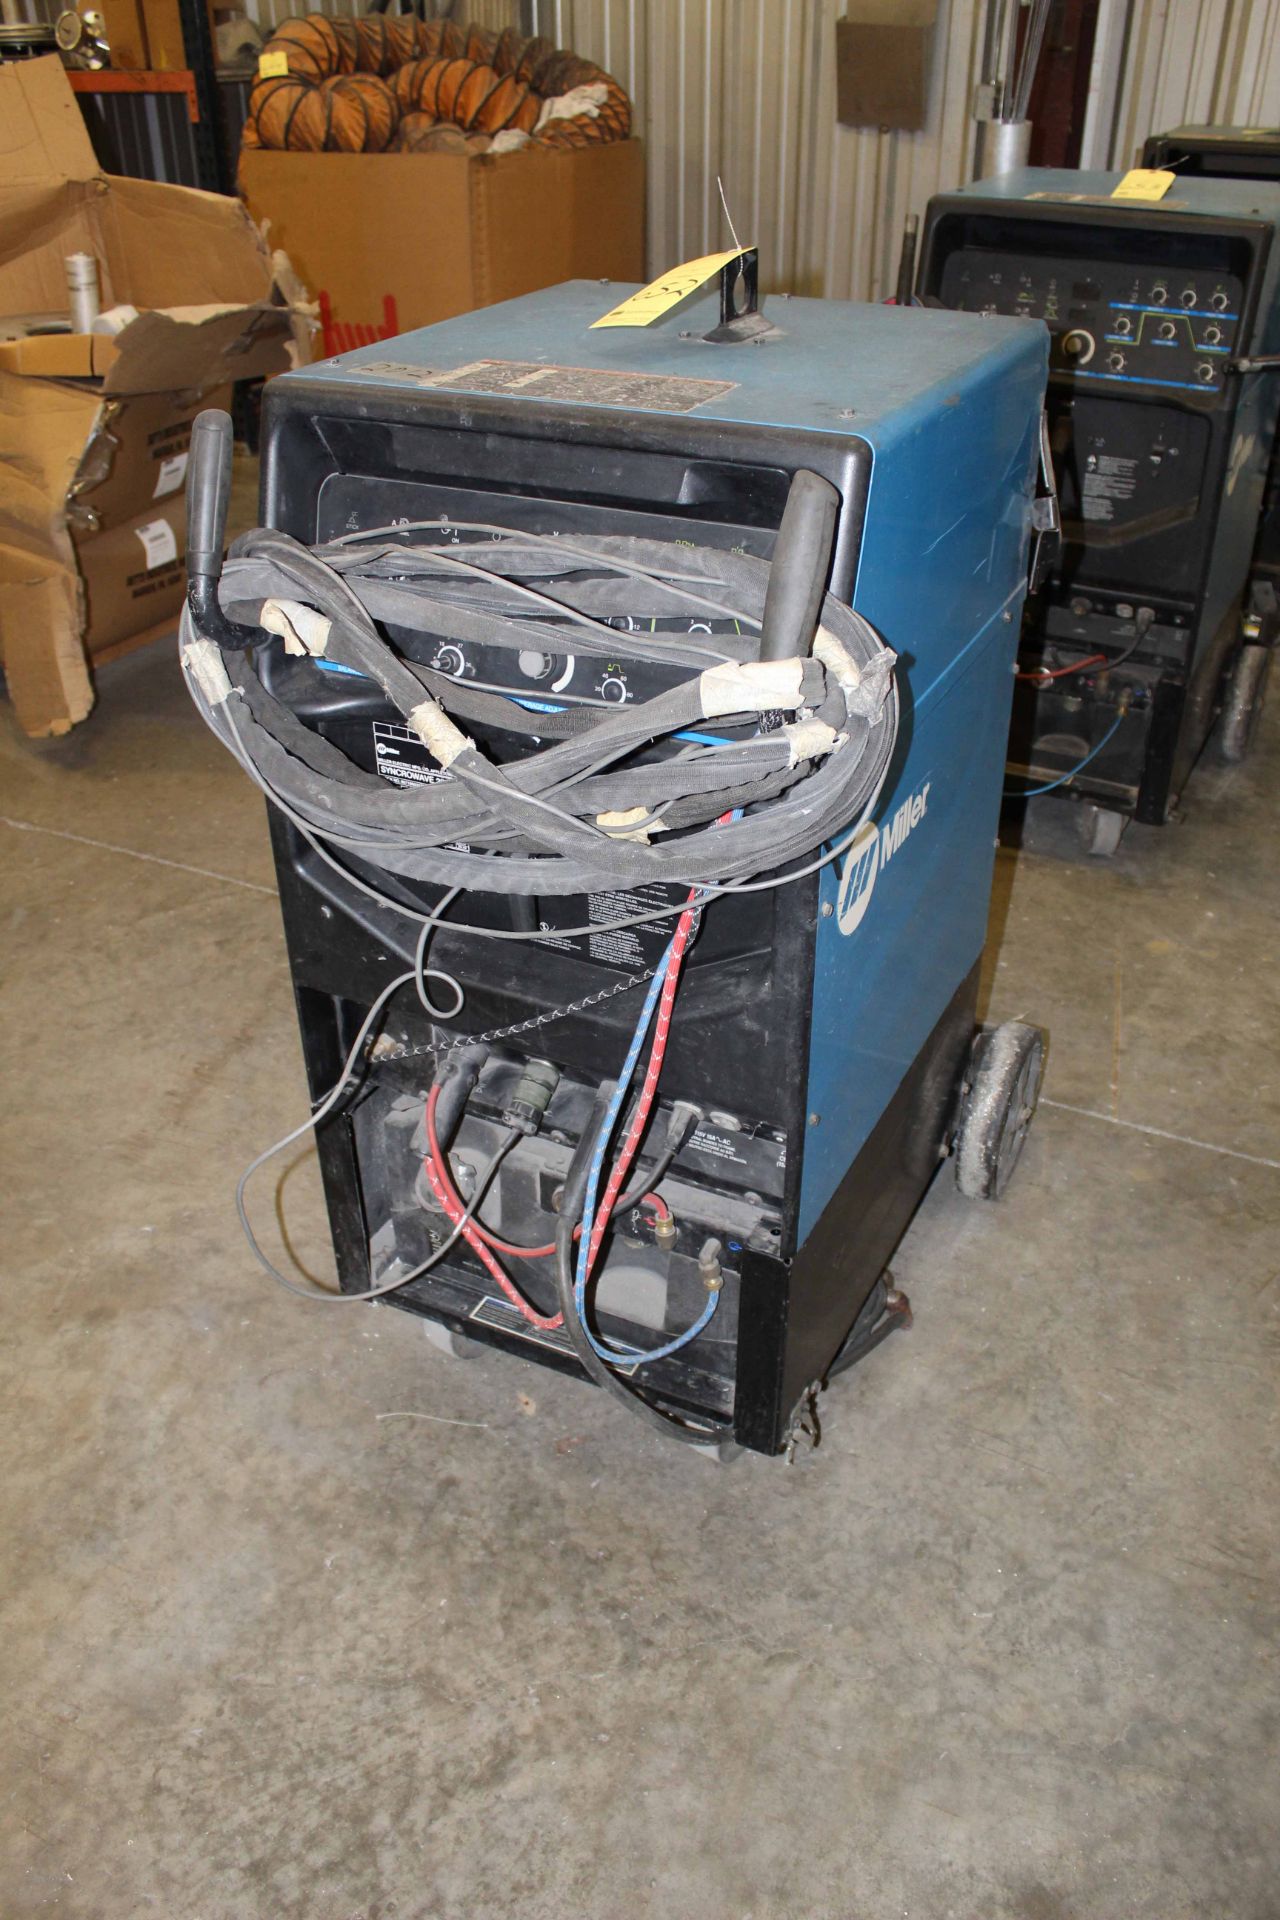 WELDING MACHINE, MILLER SYNCROWAVE 250DX, new 2012, S/N MC010207L - Image 2 of 3